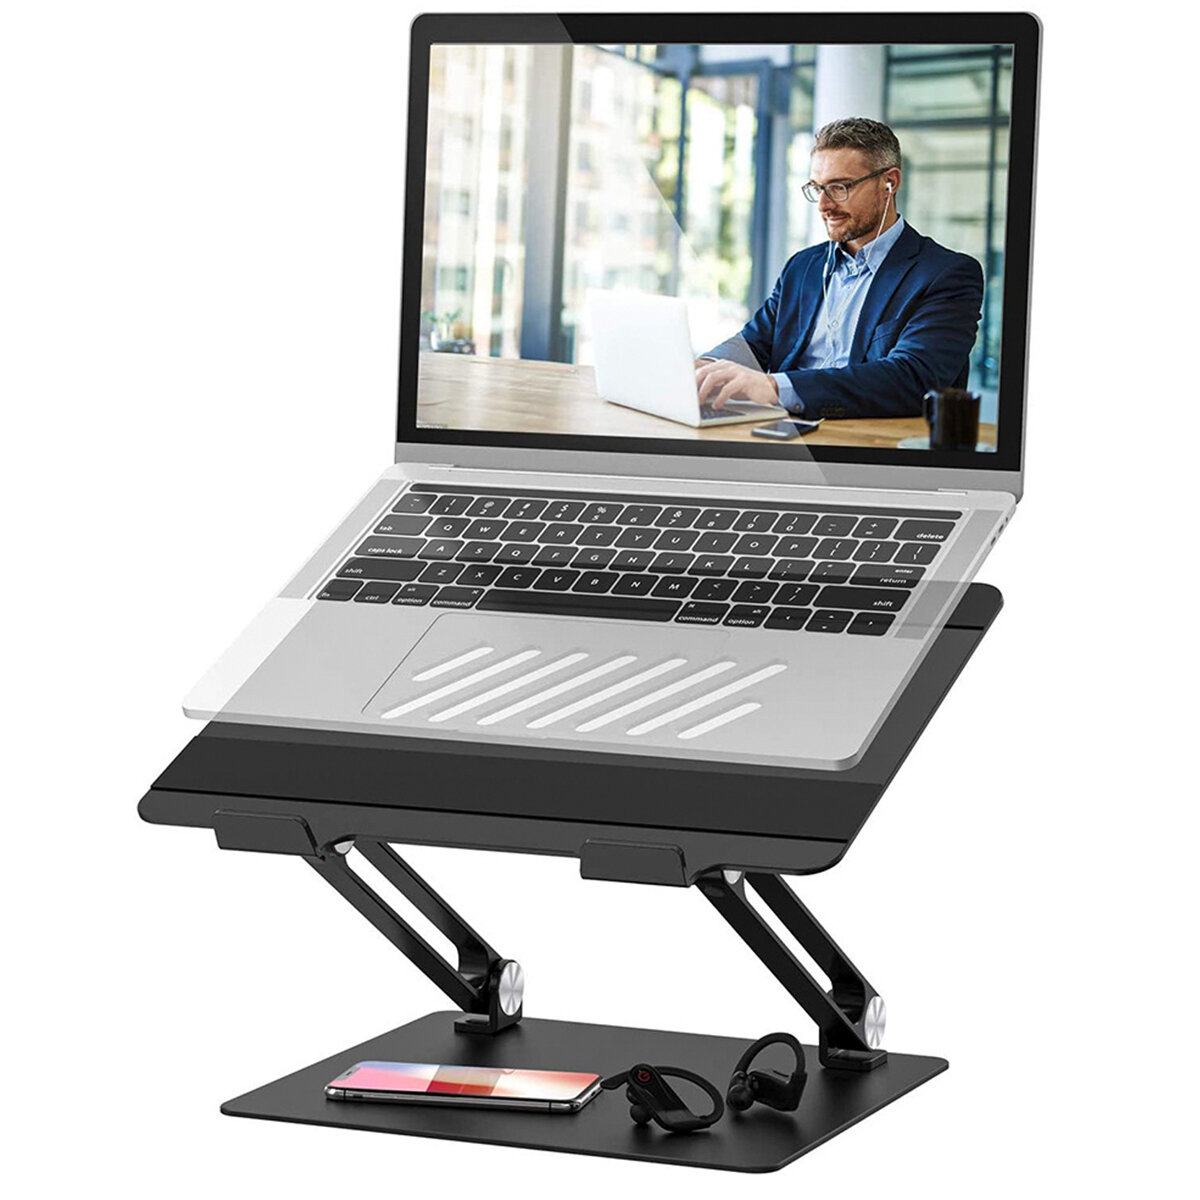 

295*230*40mm Aluminum Alloy Folding laptop Stand 11-17 Inch Portable Adjustable Computer Stand Heat Dissipation Bracket